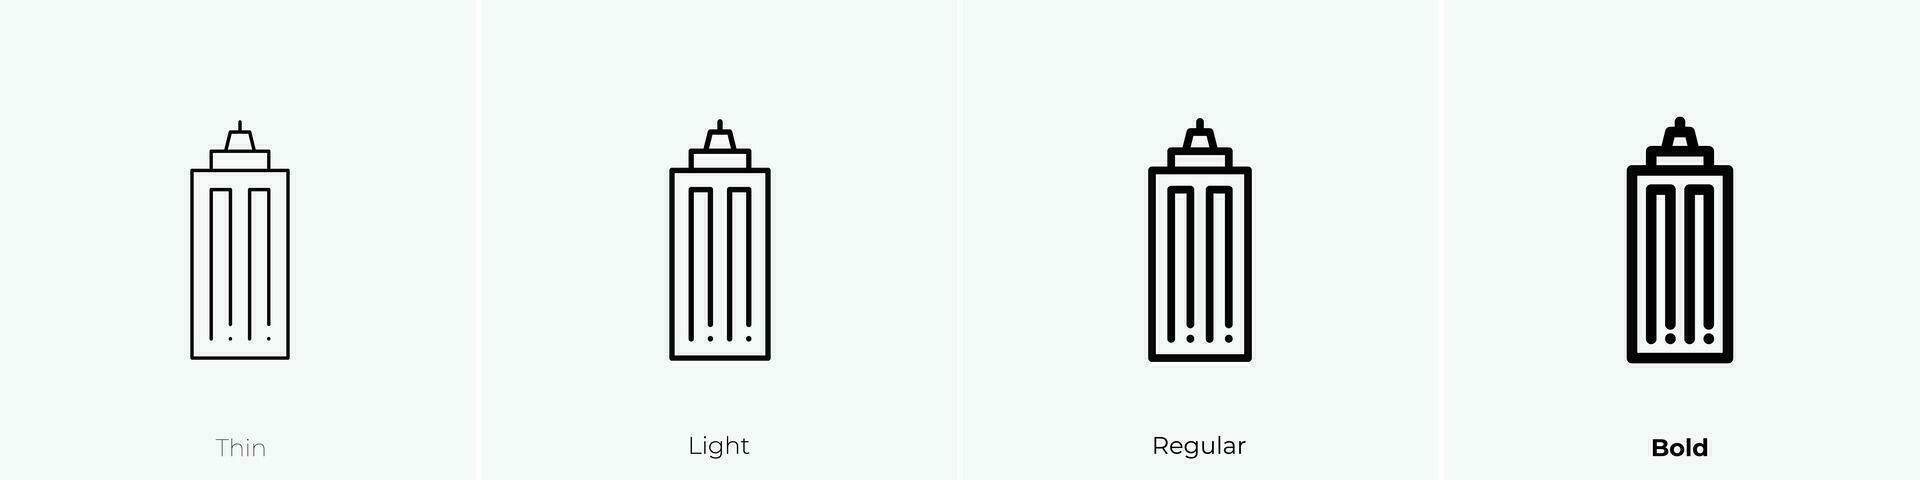 skyscrapper icon. Thin, Light, Regular And Bold style design isolated on white background vector